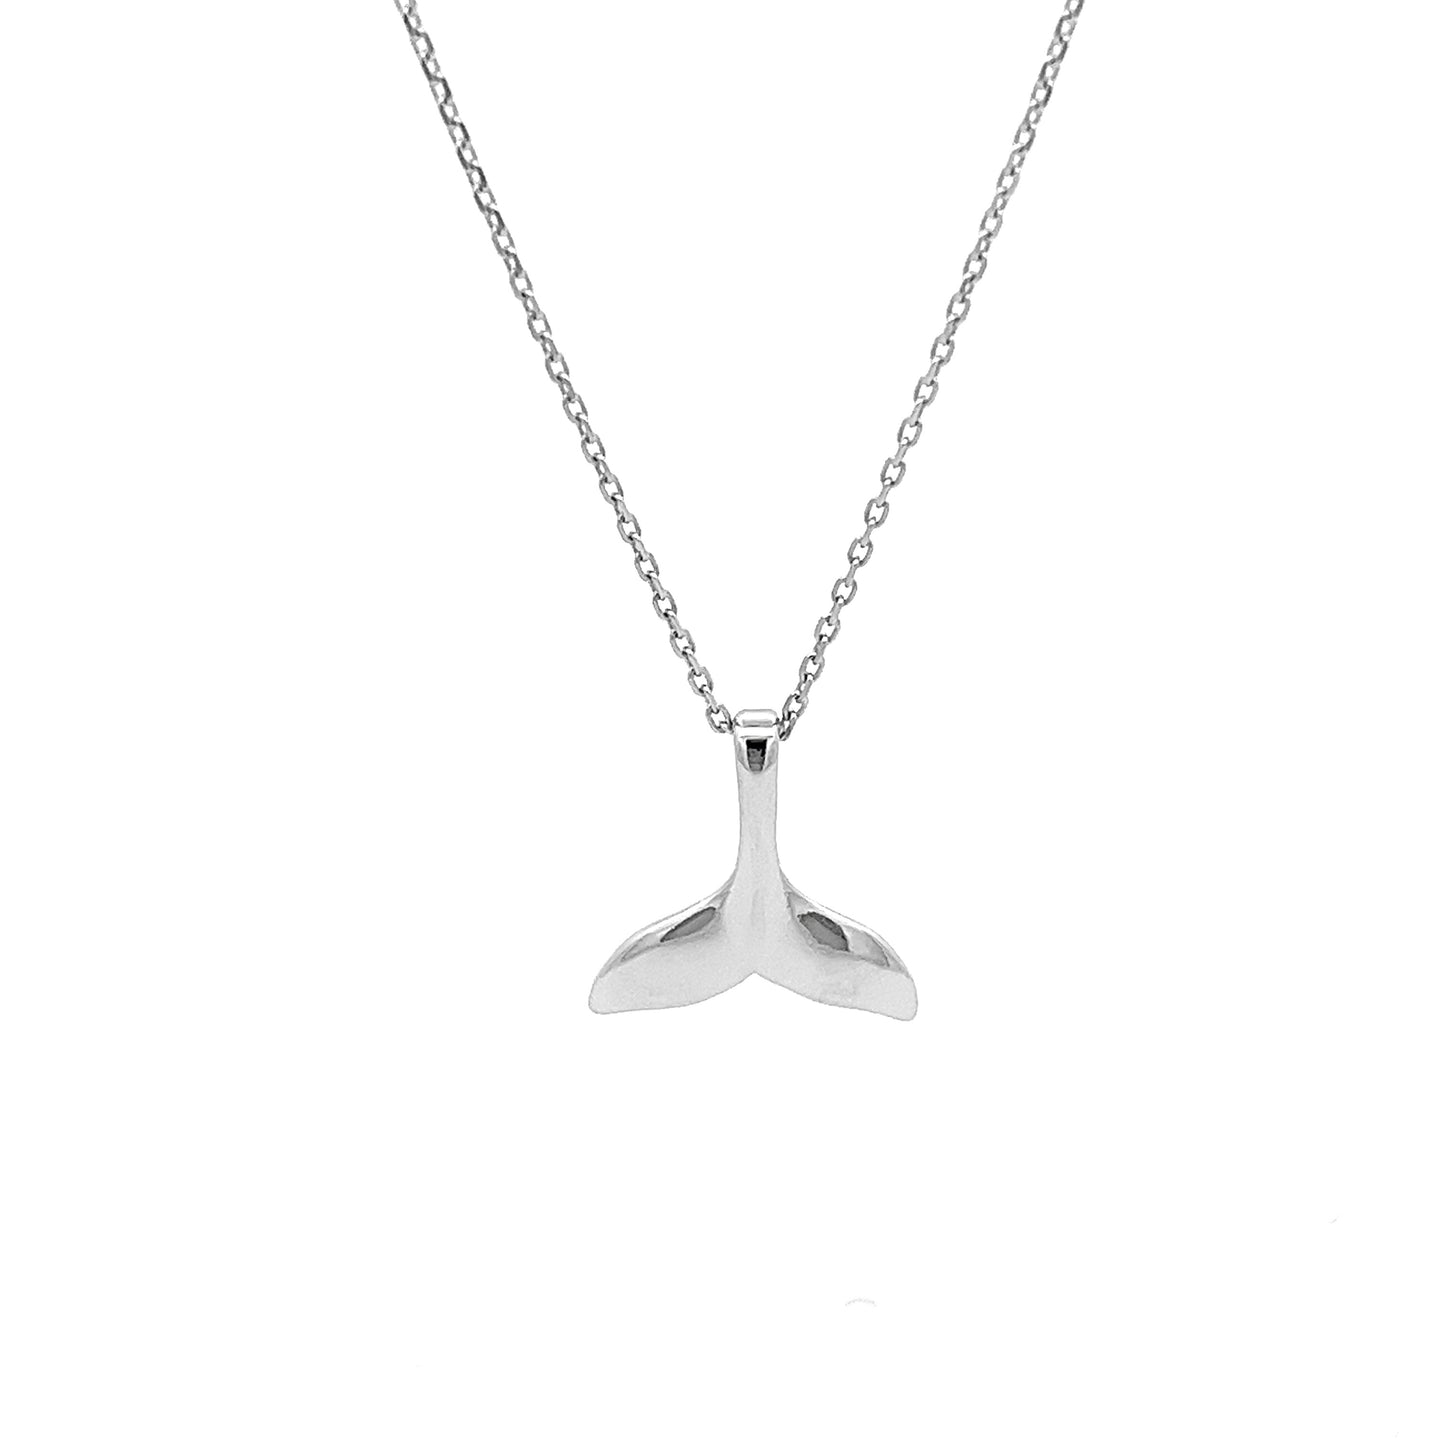 Whale Tale Necklace in Silver